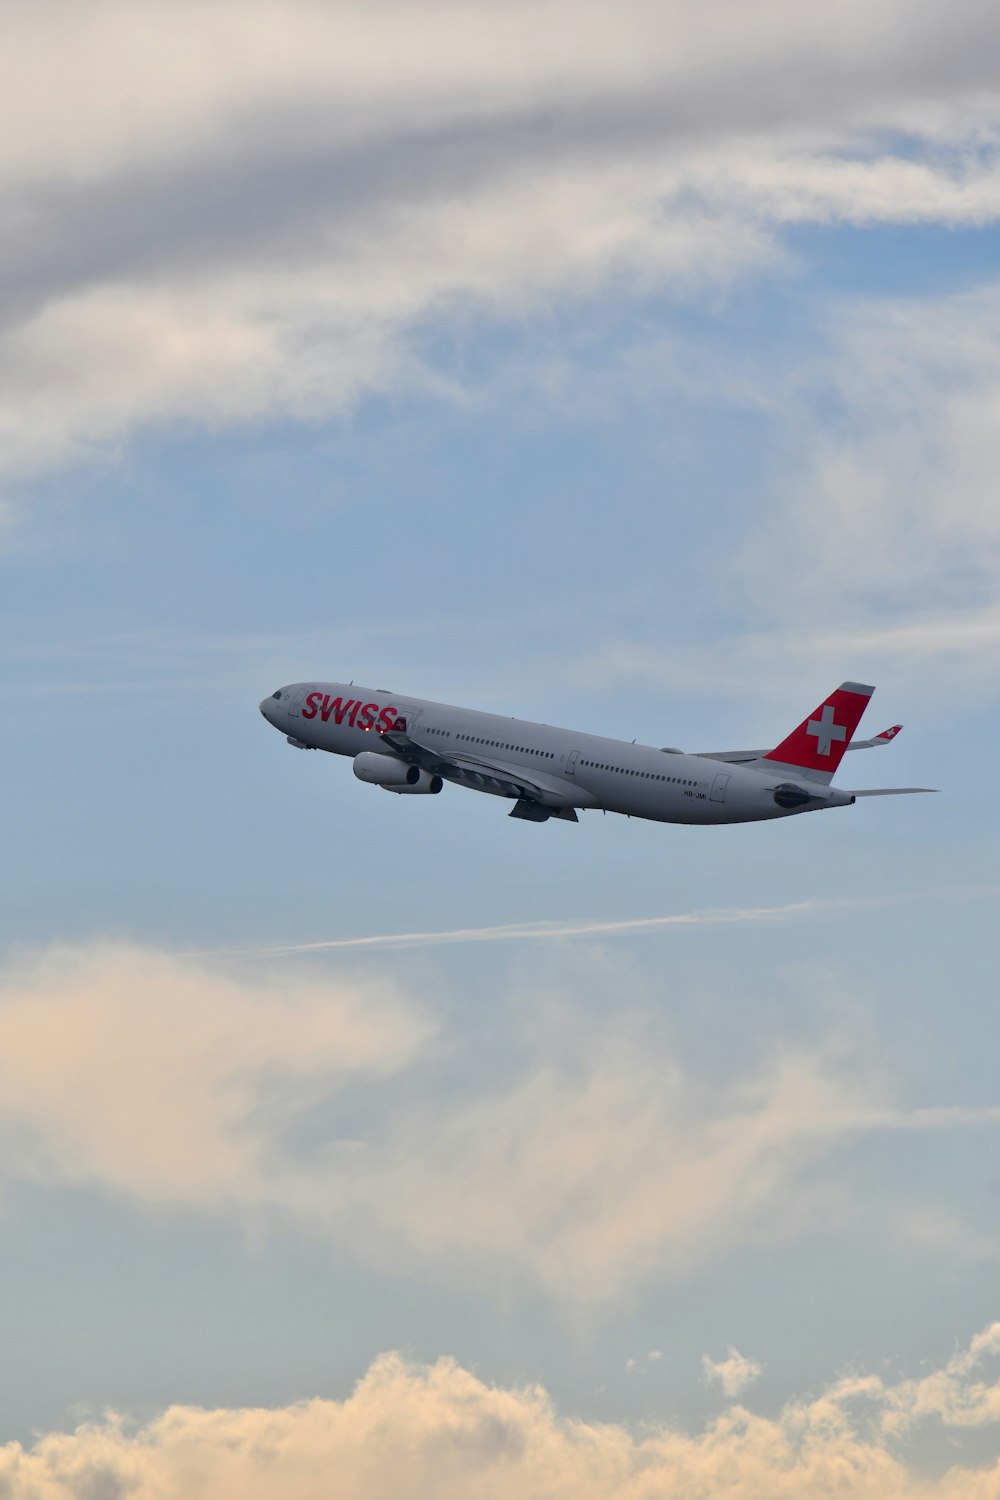 a large jetliner flying through a cloudy blue sky